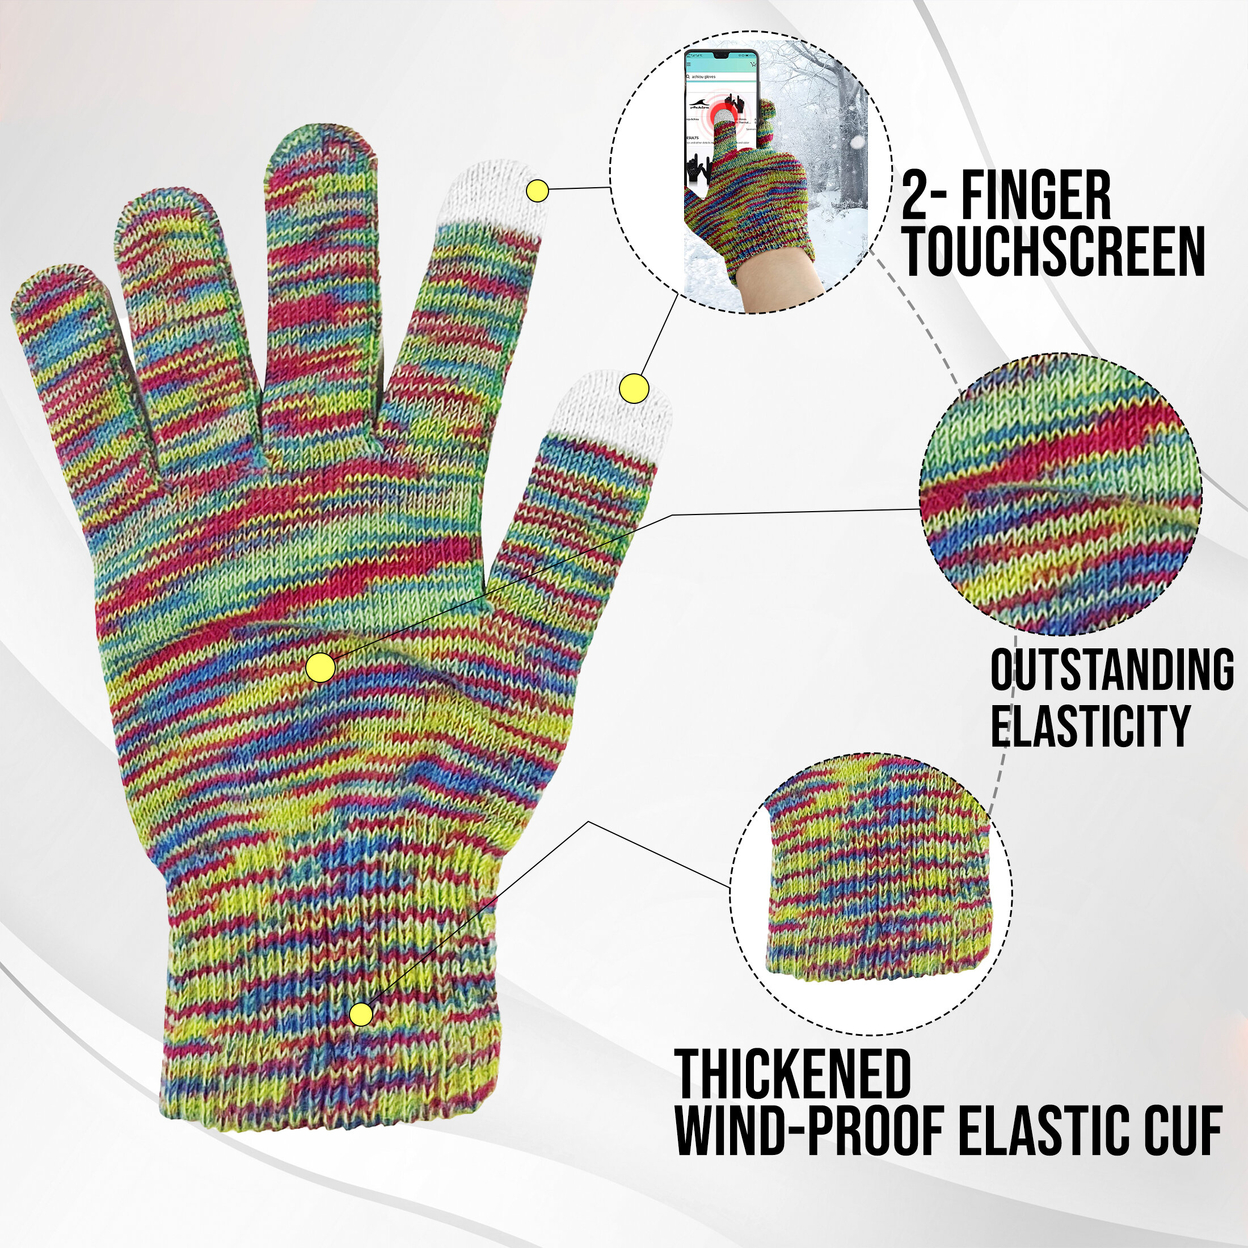 Multi-Pairs: Women's Winter Warm Soft Knit Touchscreen Multi-Tone Texting Gloves - 2-pairs